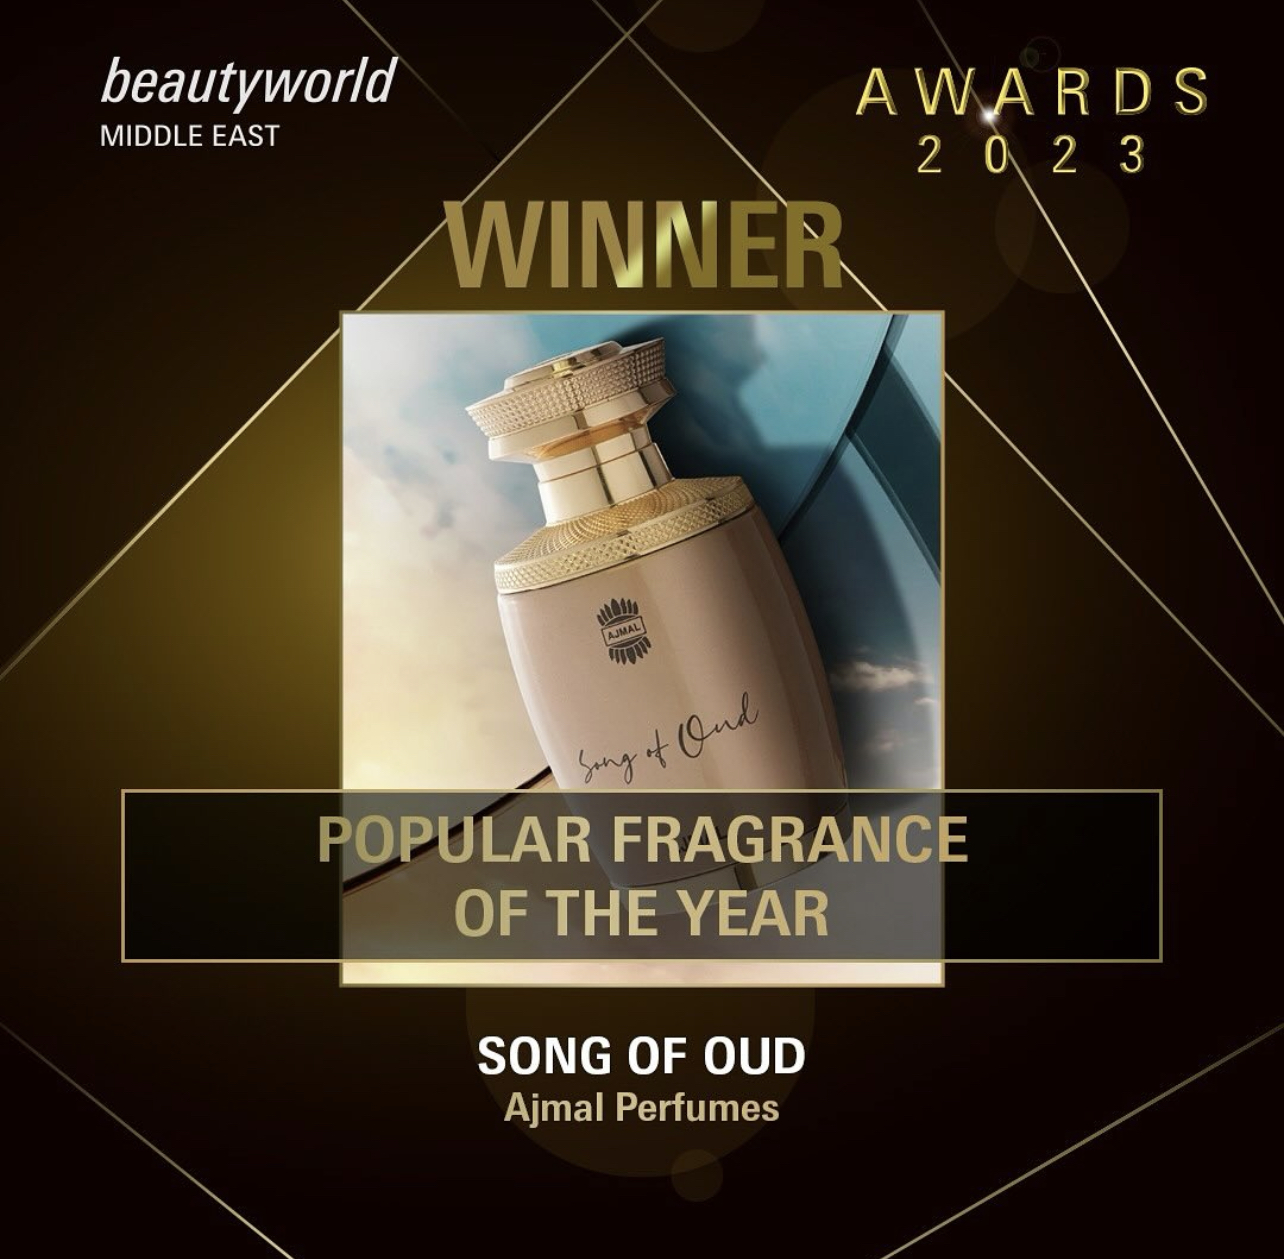 best perfume - News, Reviews, Photos & Videos on best perfume - GQ Middle  East